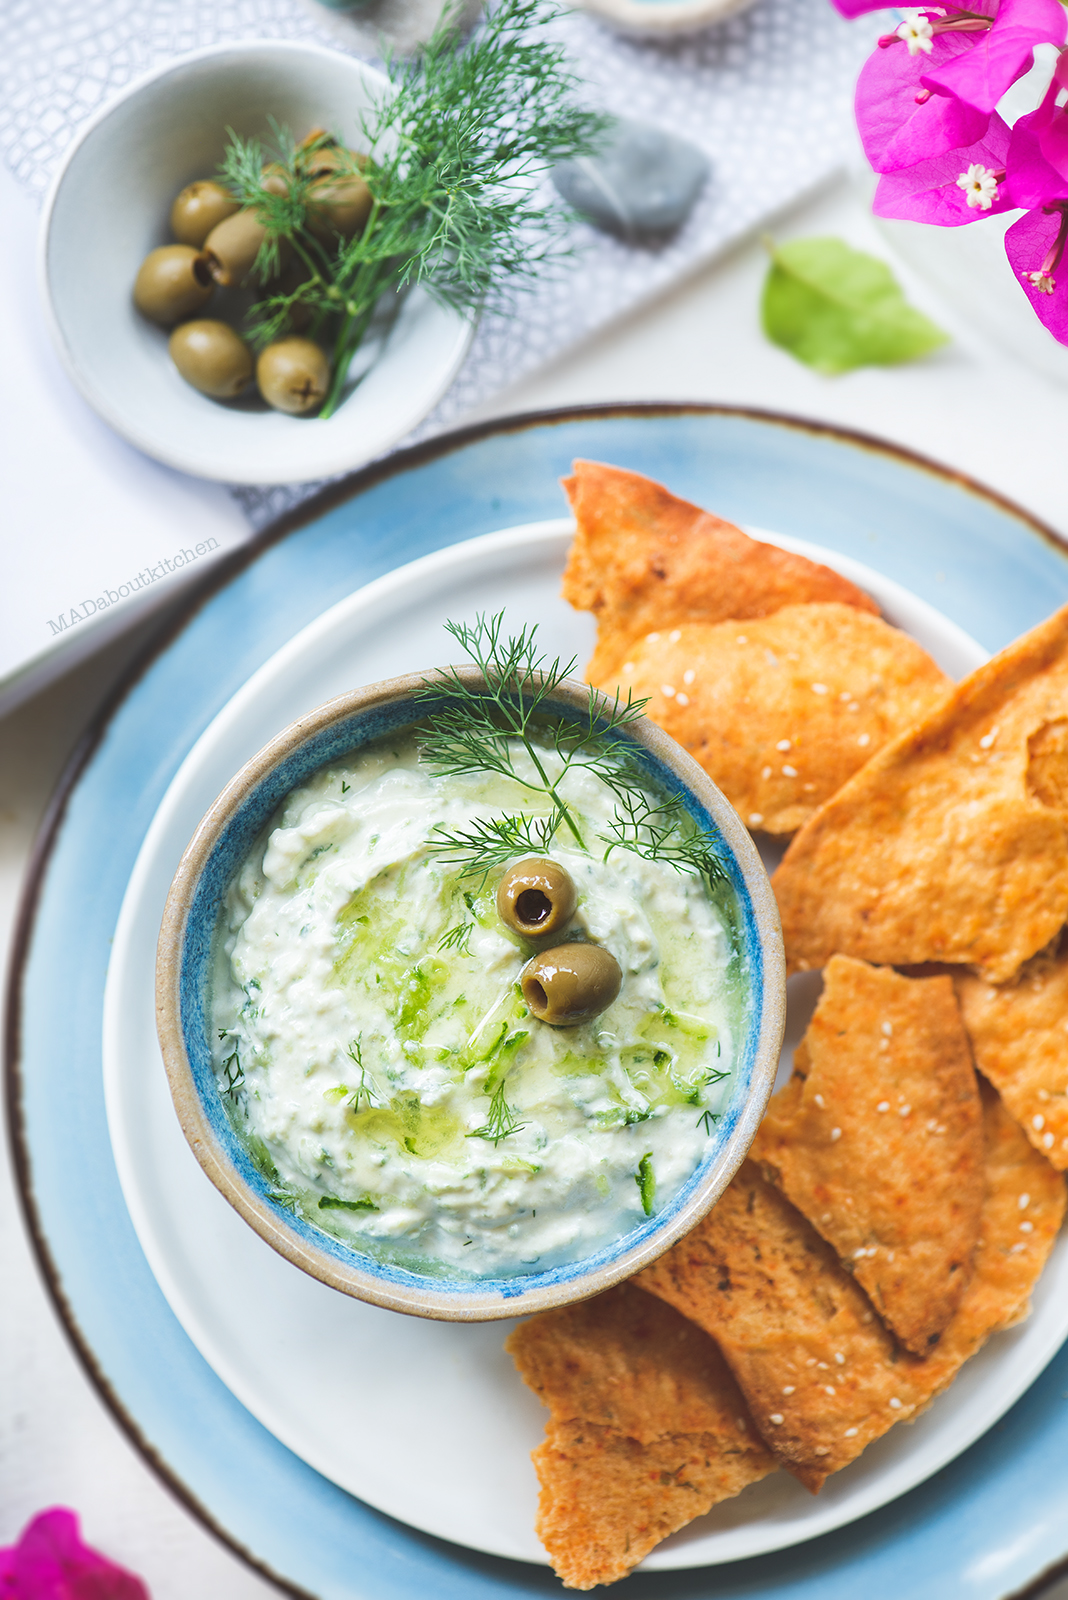 Tzatziki, the greek yogurt dip is a simple dip made using hung curd and is flavoured with garlic, dil leaves and drizzled with extra virgin olive oil.